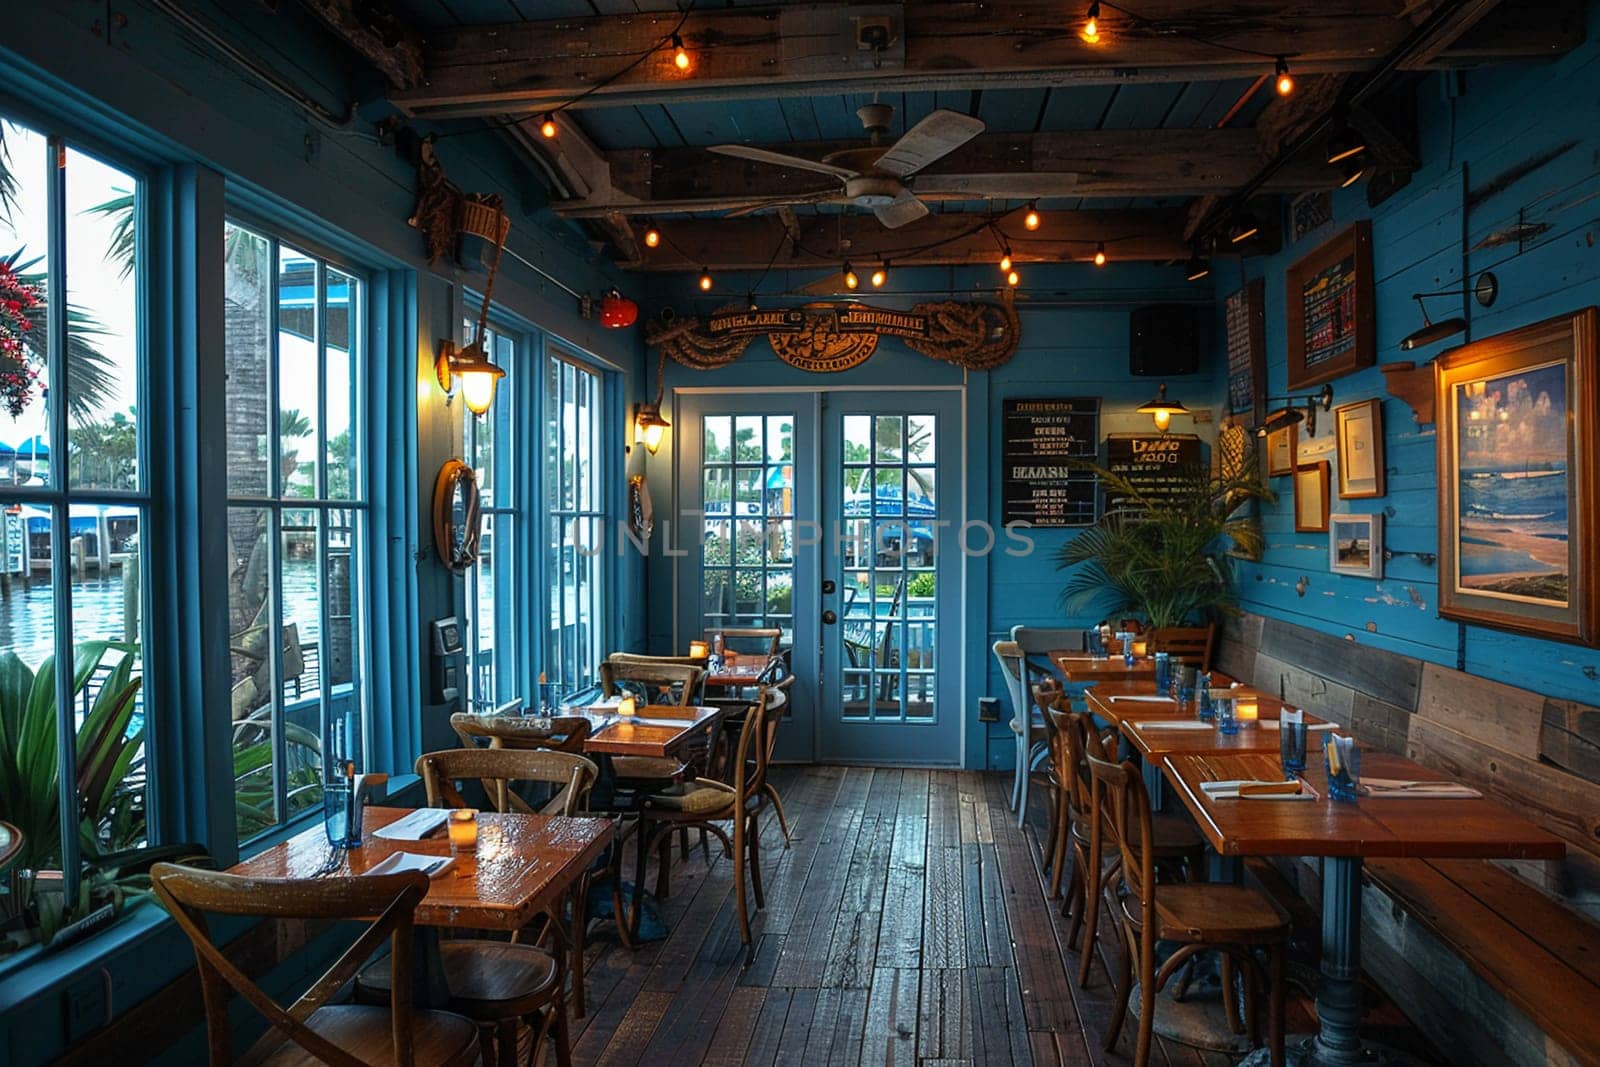 Seaside seafood restaurant with dockside views and nautical decor